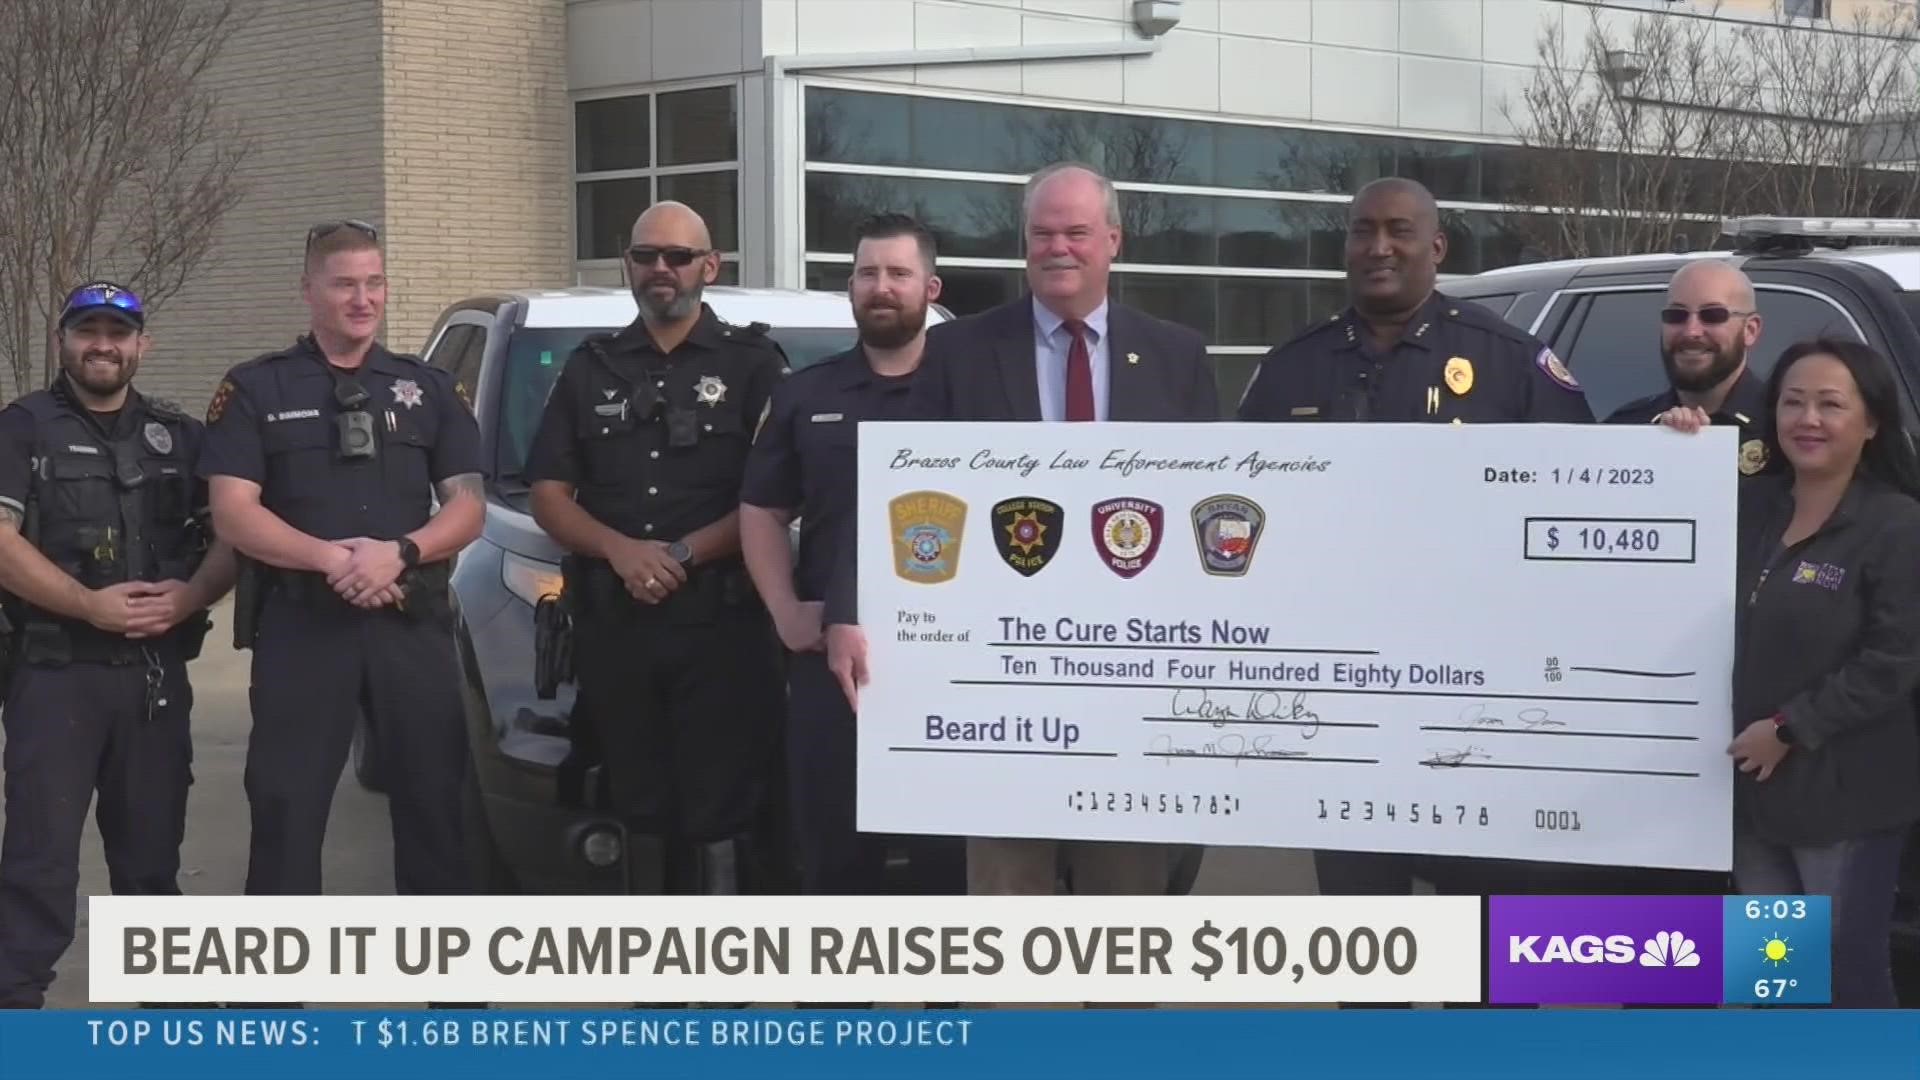 Four local law enforcement agencies participated in the Beard It Up and Color for the Cure campaigns to raise money for childhood cancer research.